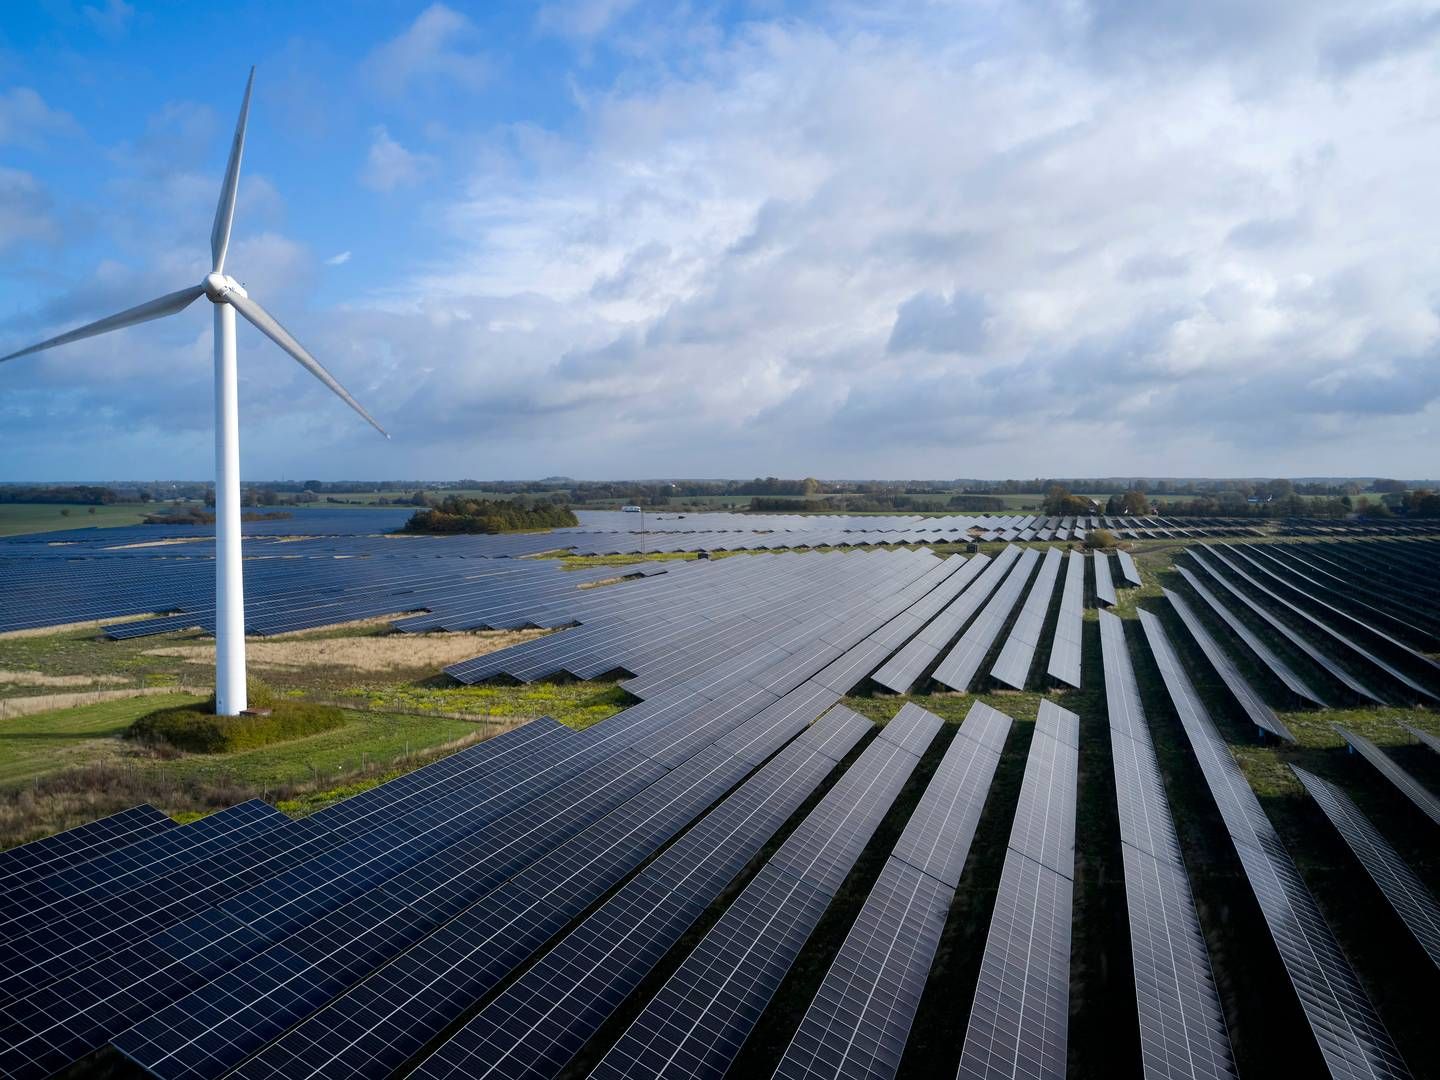 Solar PV and wind turbines should be allowed to take up more space if the EU is to achieve its renewable energy targets. But challenges are mounting. | Foto: Jens Dresling